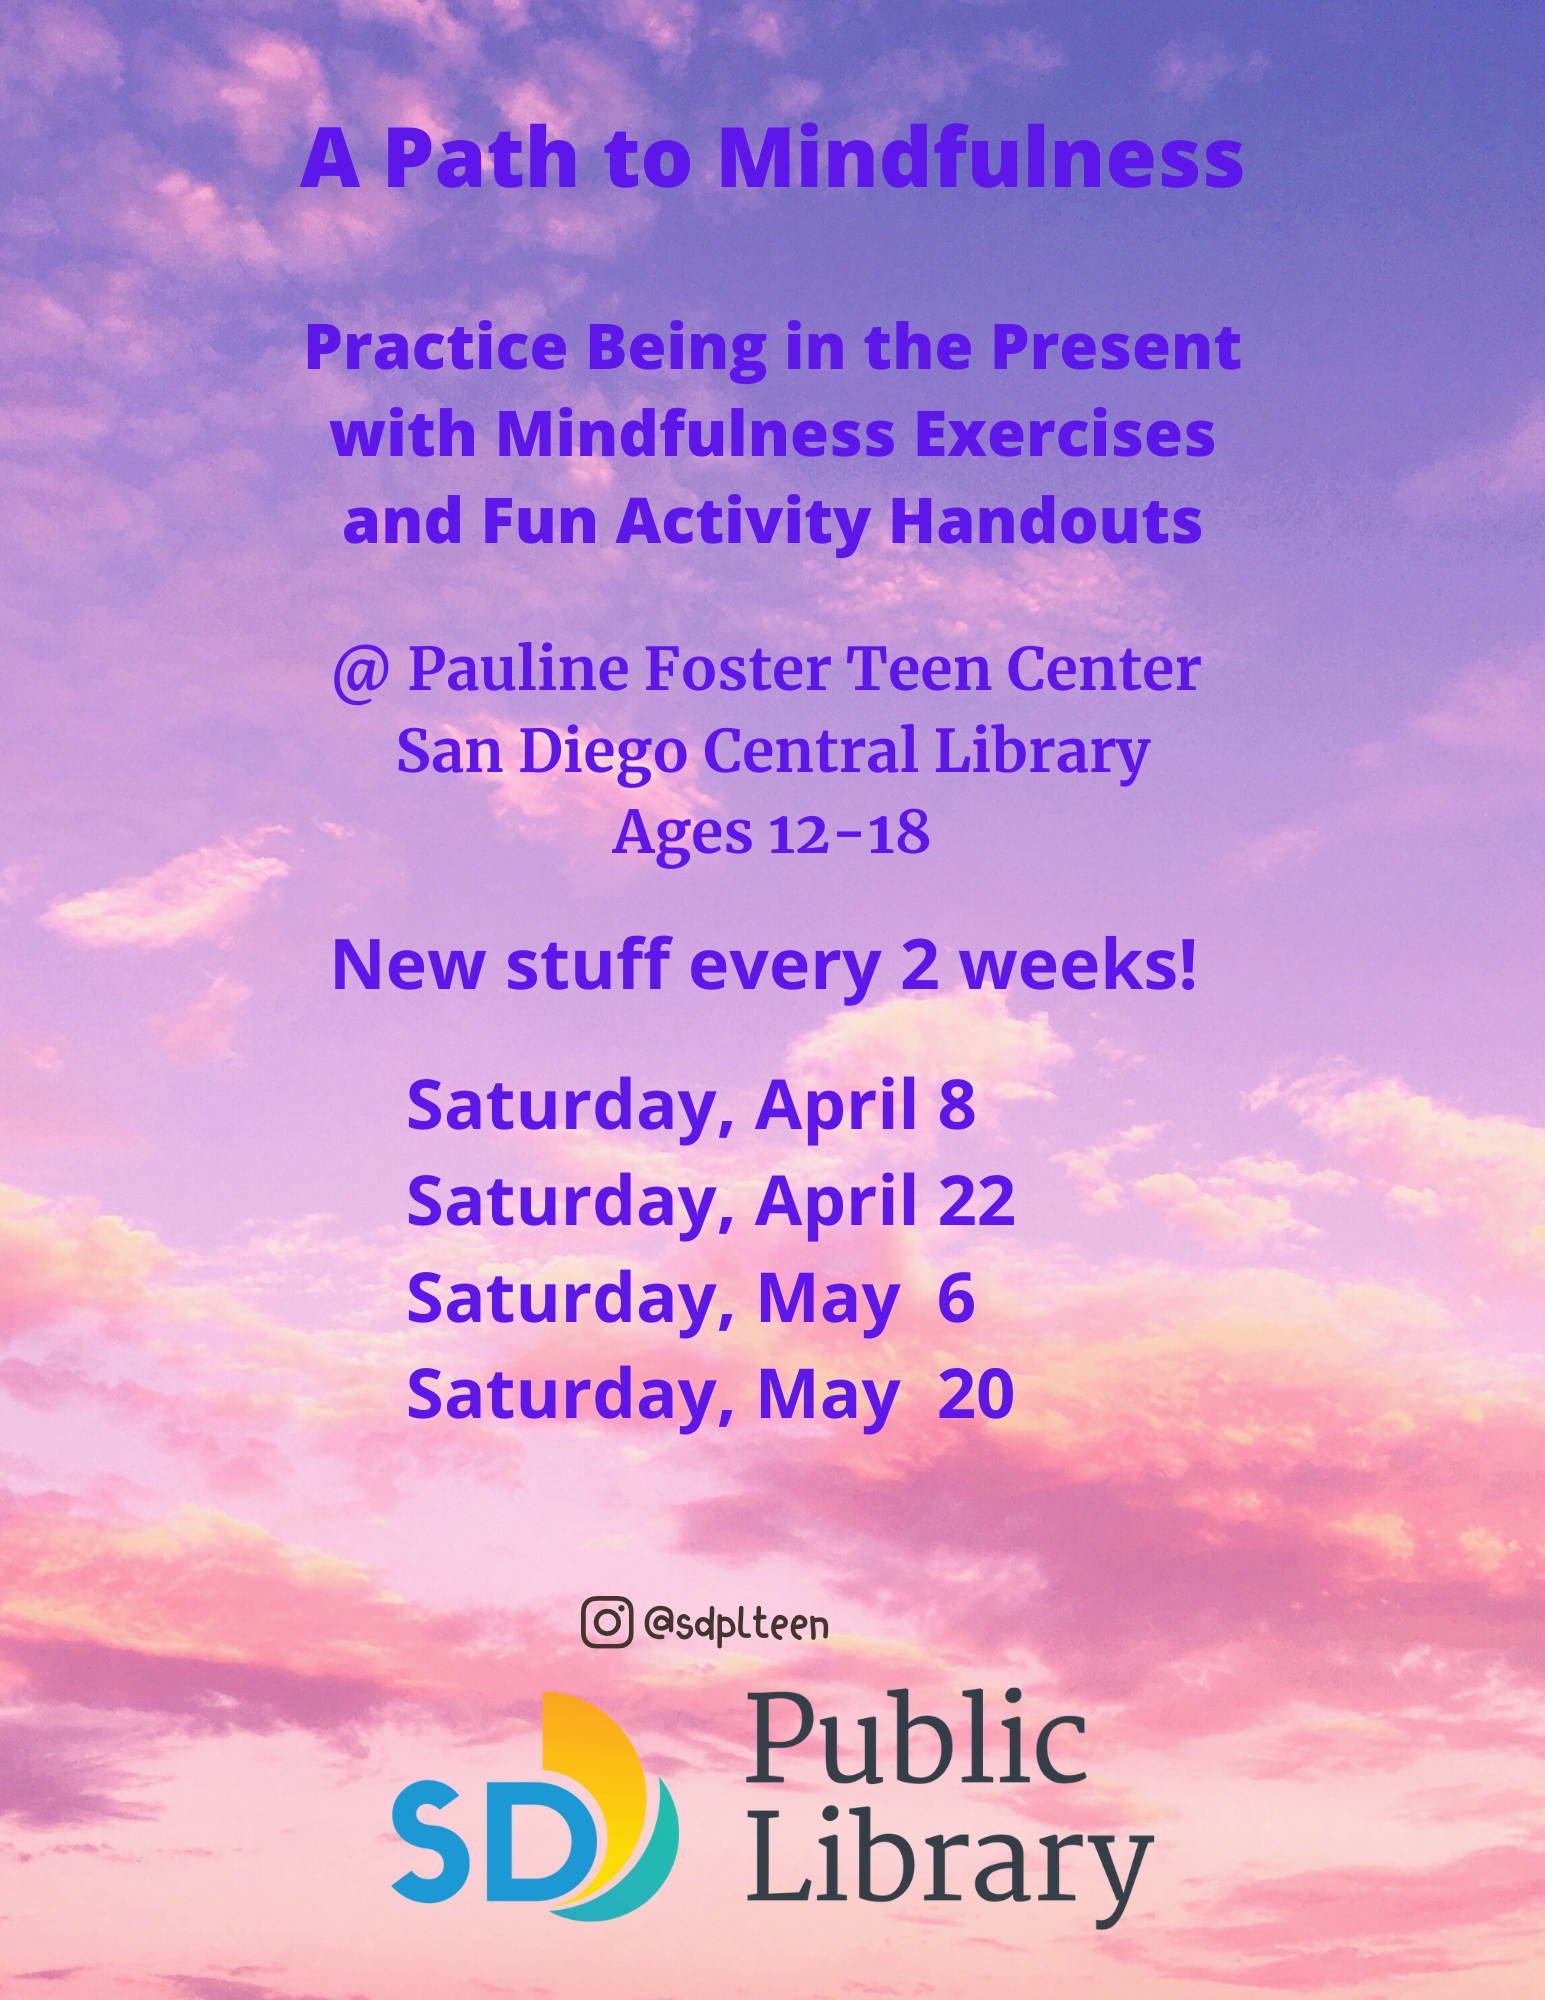 A Path to Mindfulness. Practice being in the present with mindfulness exercises and fun activity handouts. New stuff every 2 weeks! Saturdays, April 8, April 22, May 6, May 20.